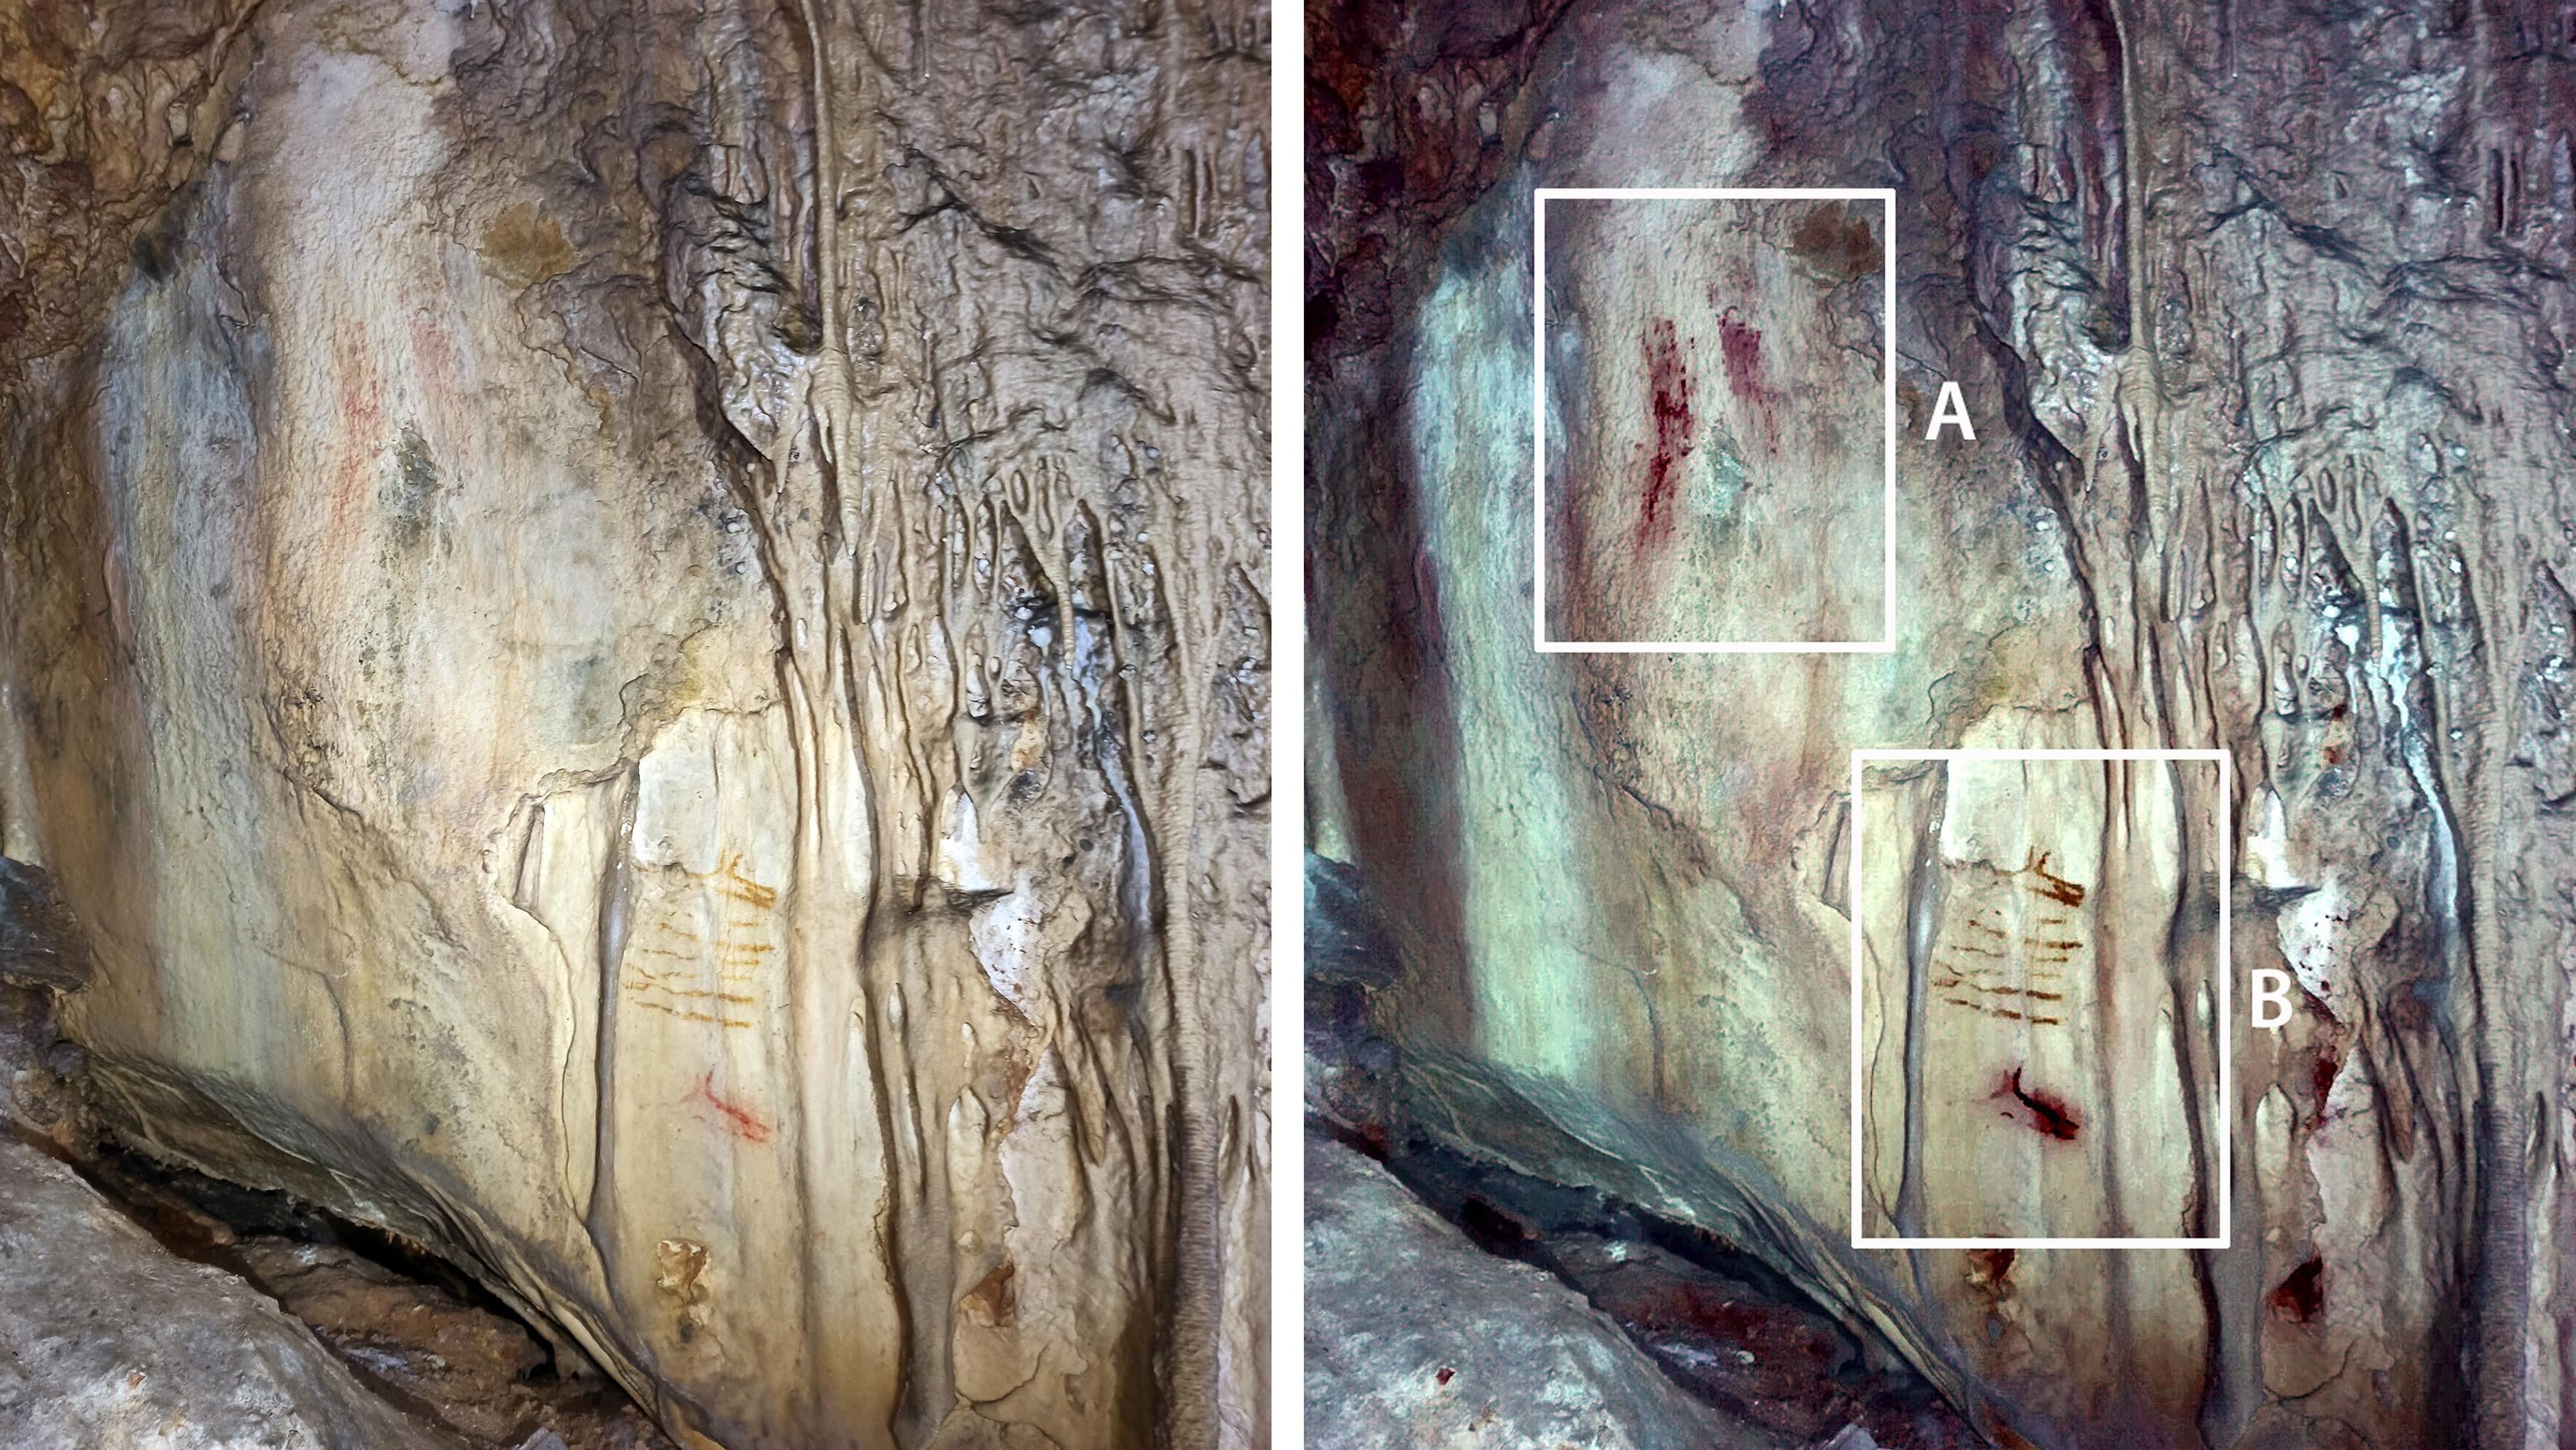 Spanish Cave Was an Art Studio for Neanderthals and Ancient Humans, Researchers Say